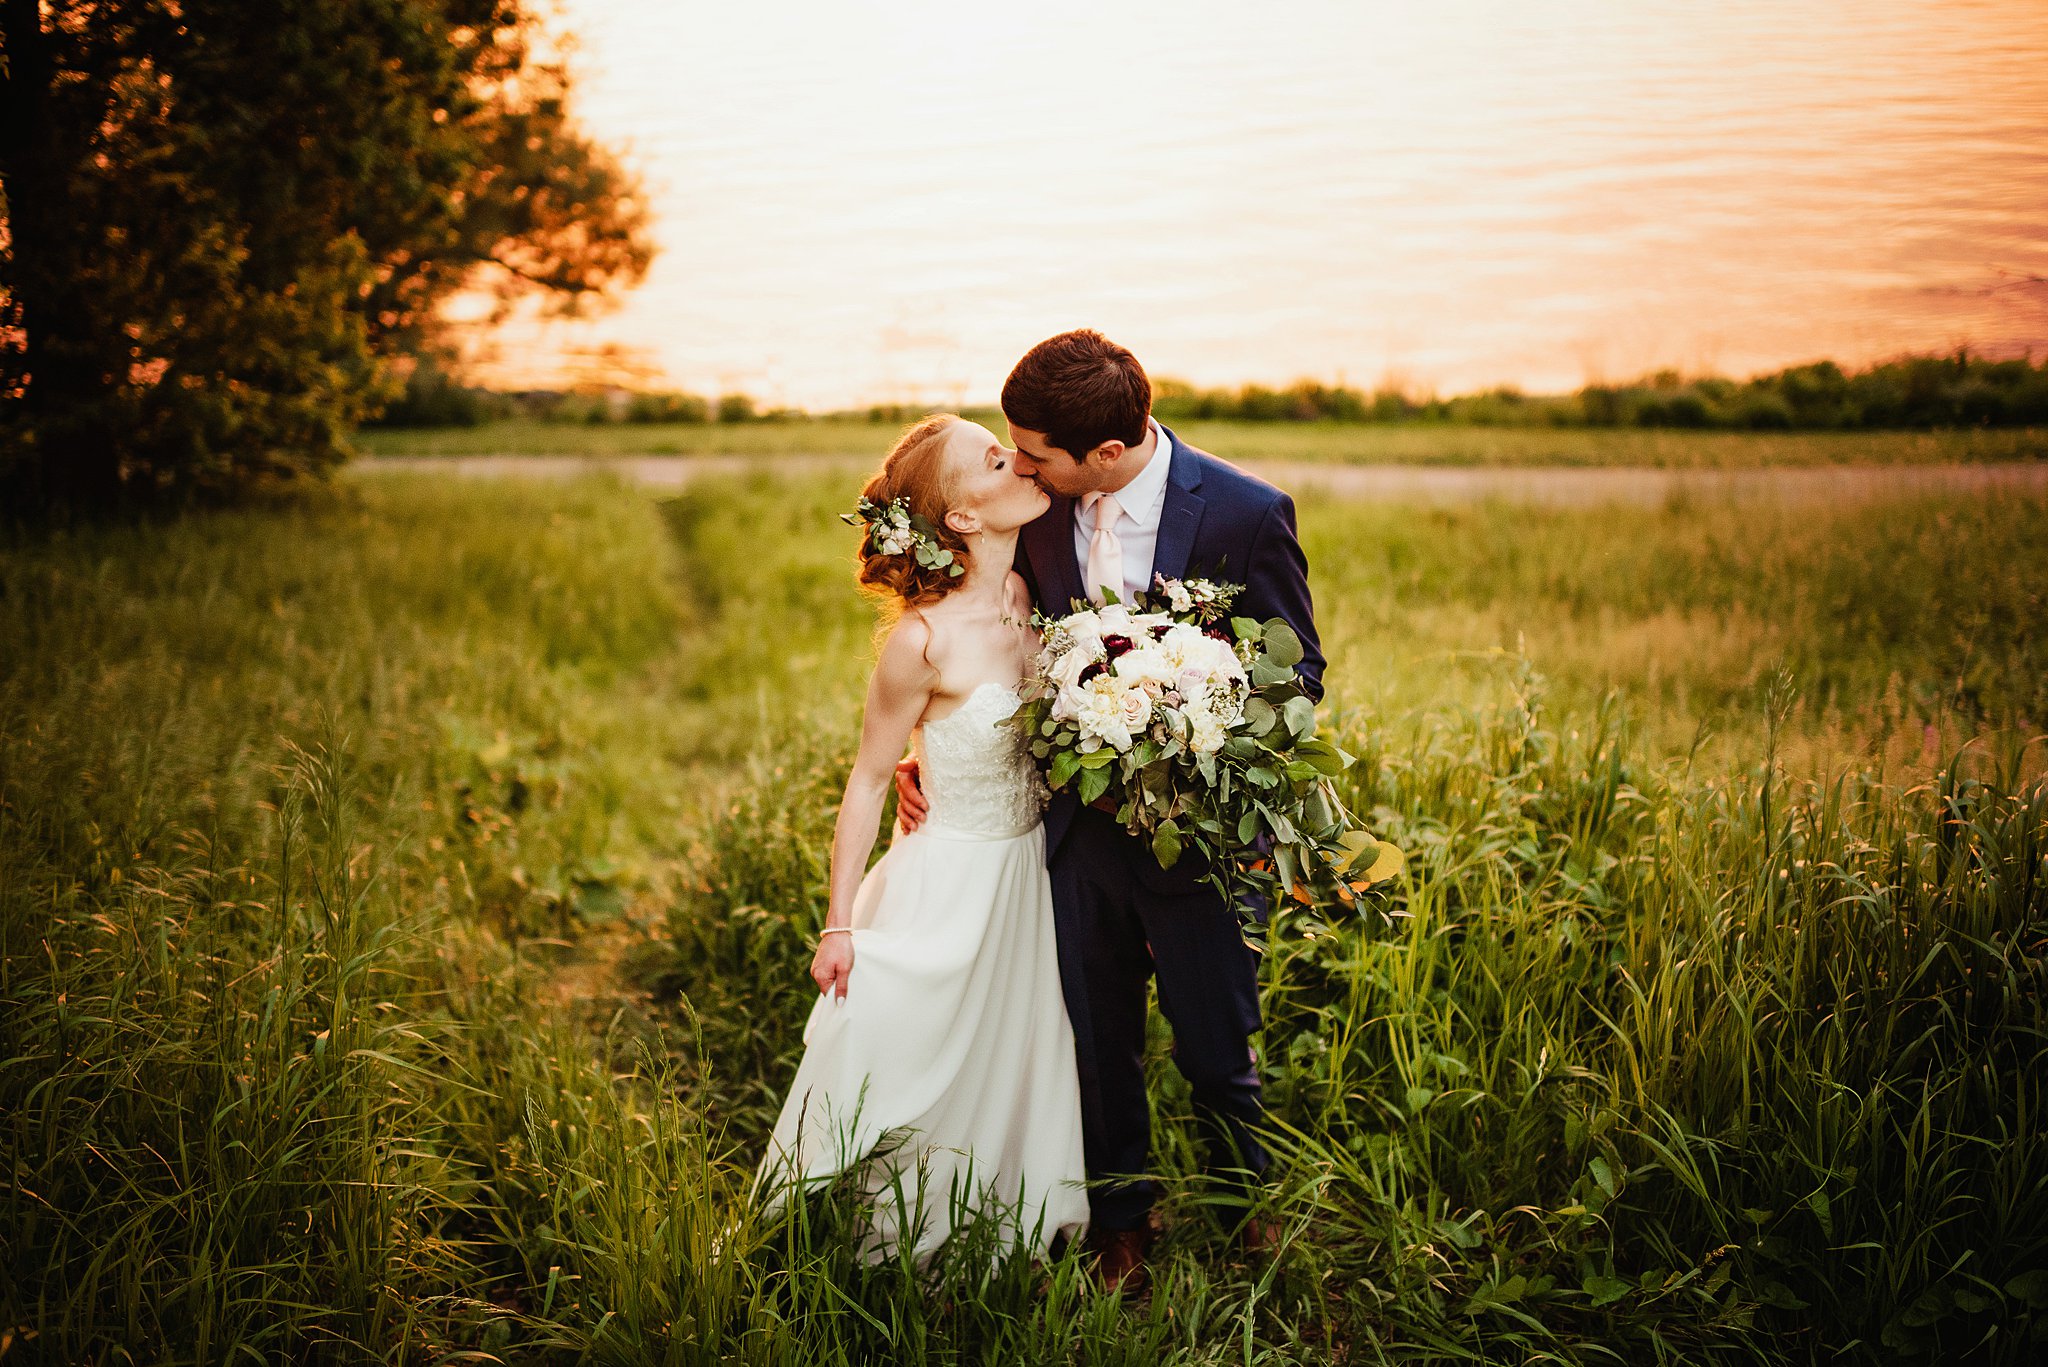 Summer Wedding at Mirror Lake State Park in Baraboo WI